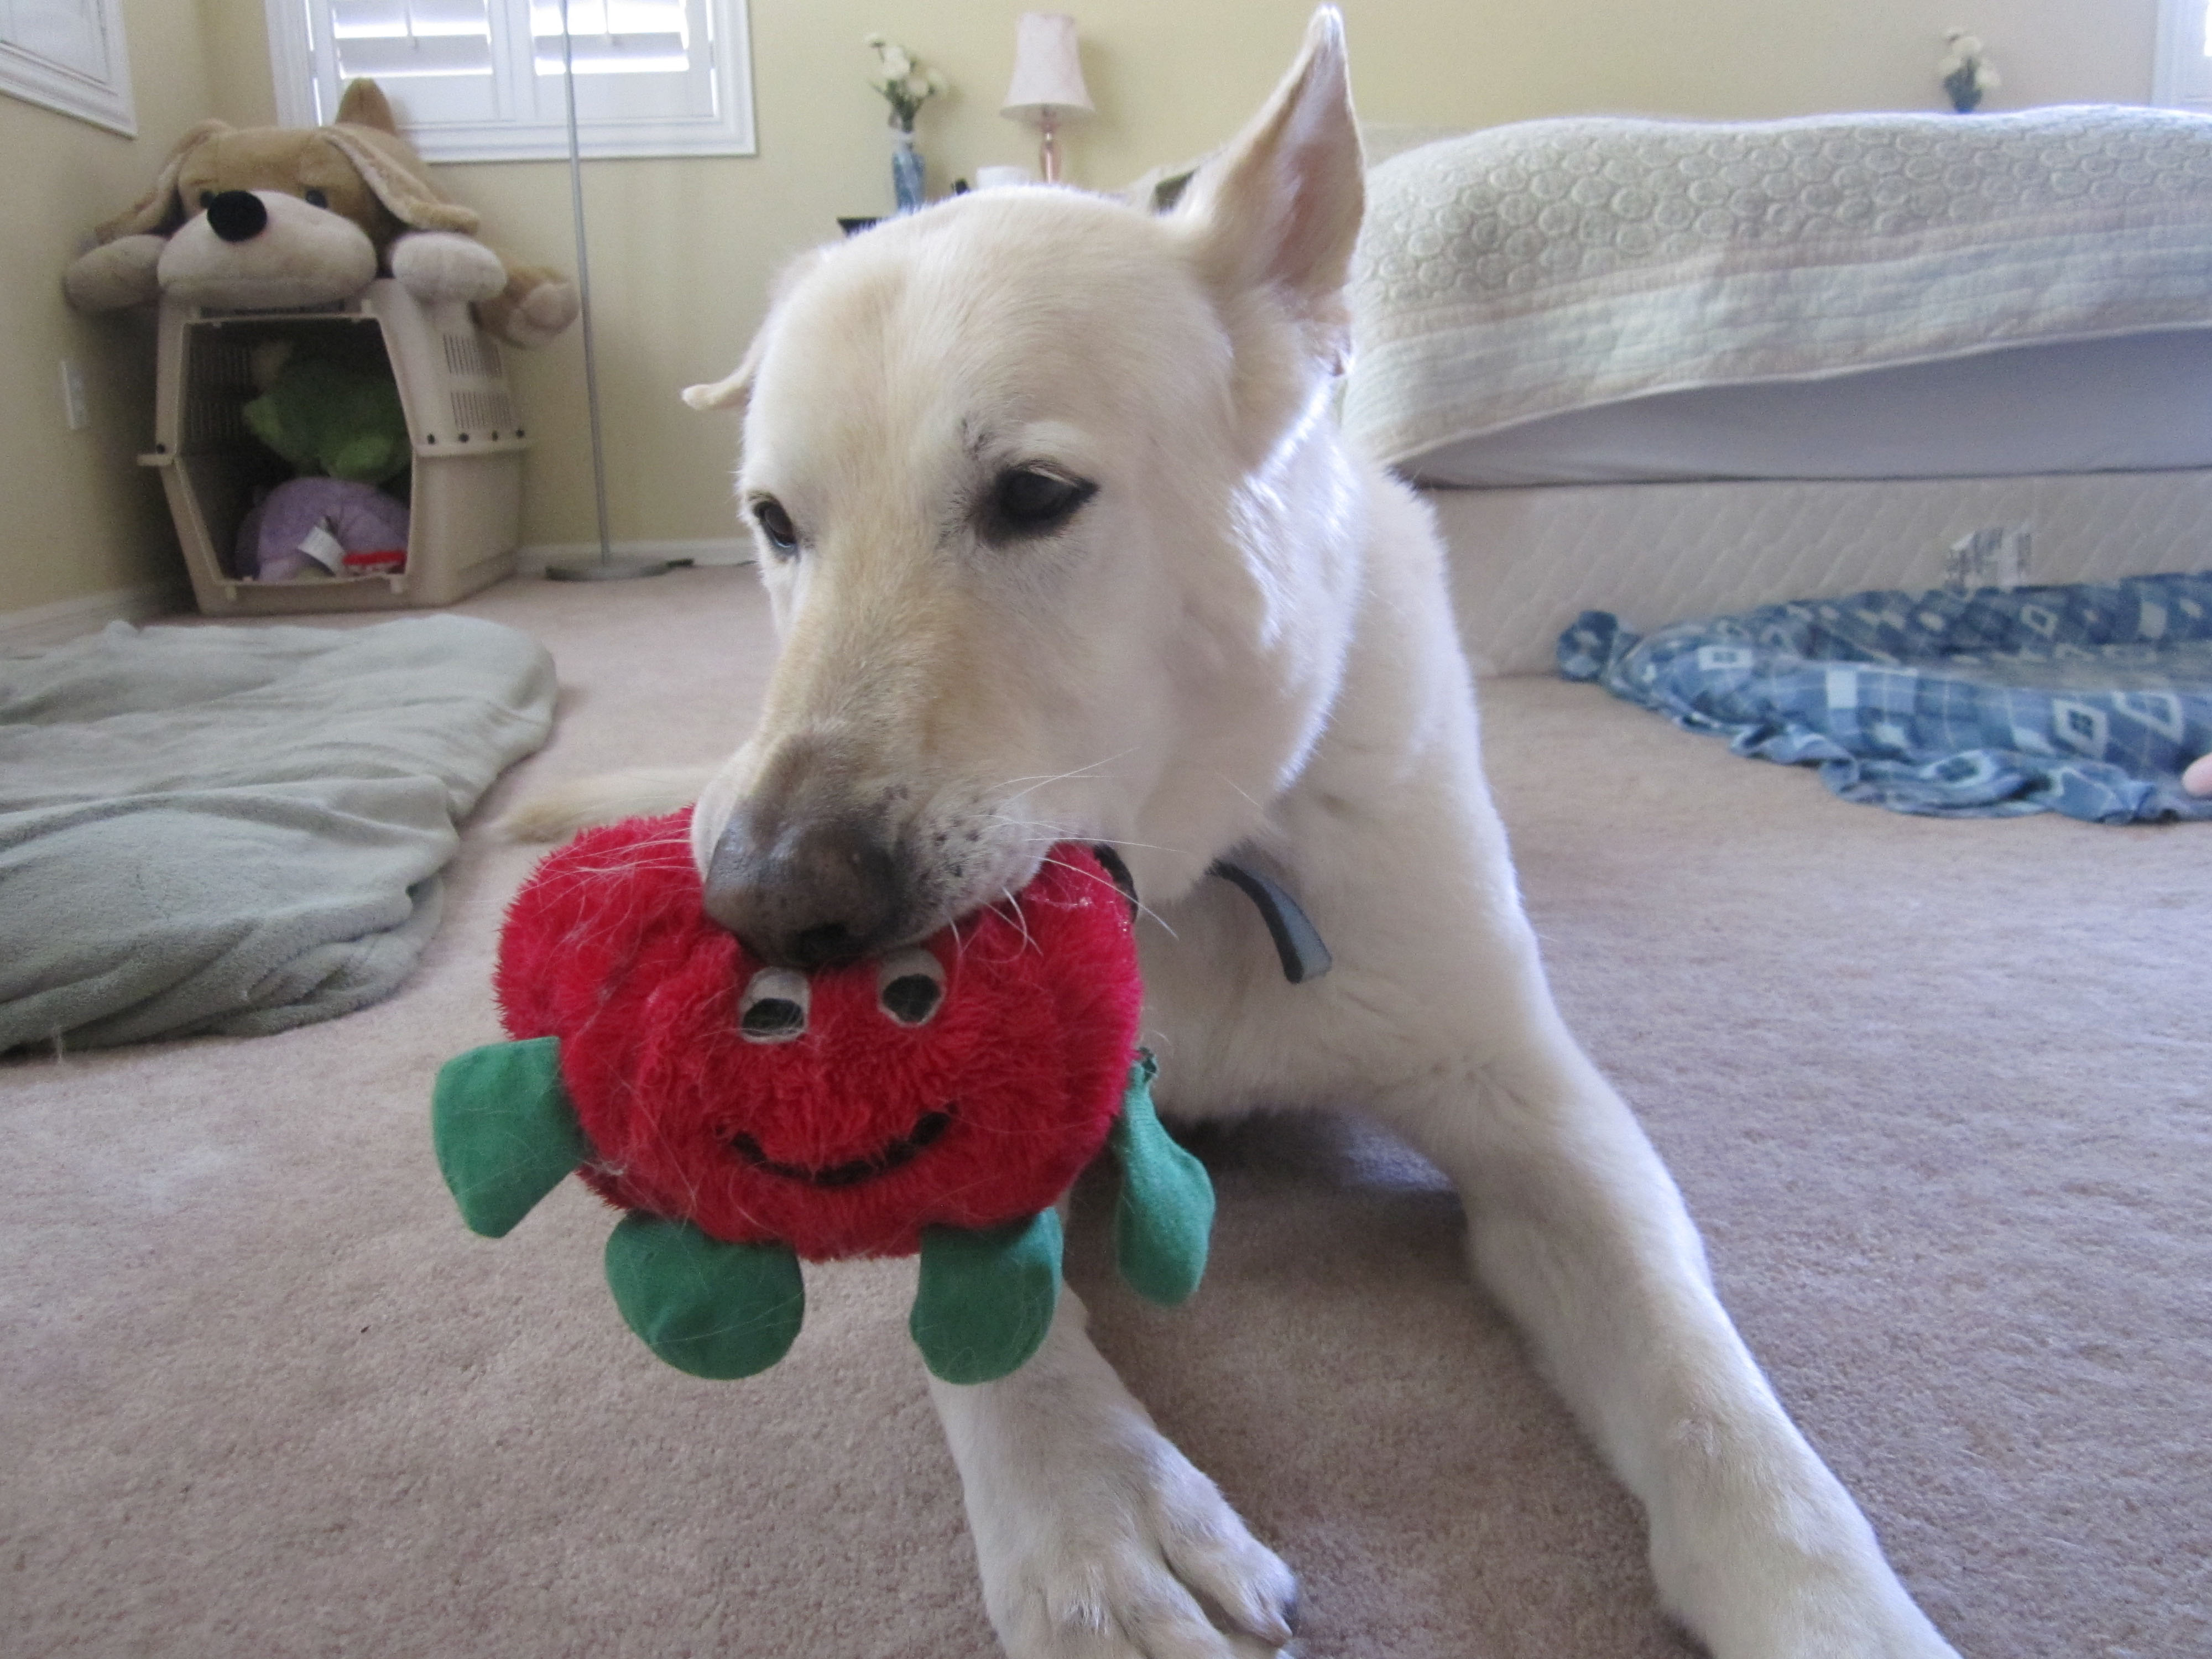 Brucie with his beloved tomato